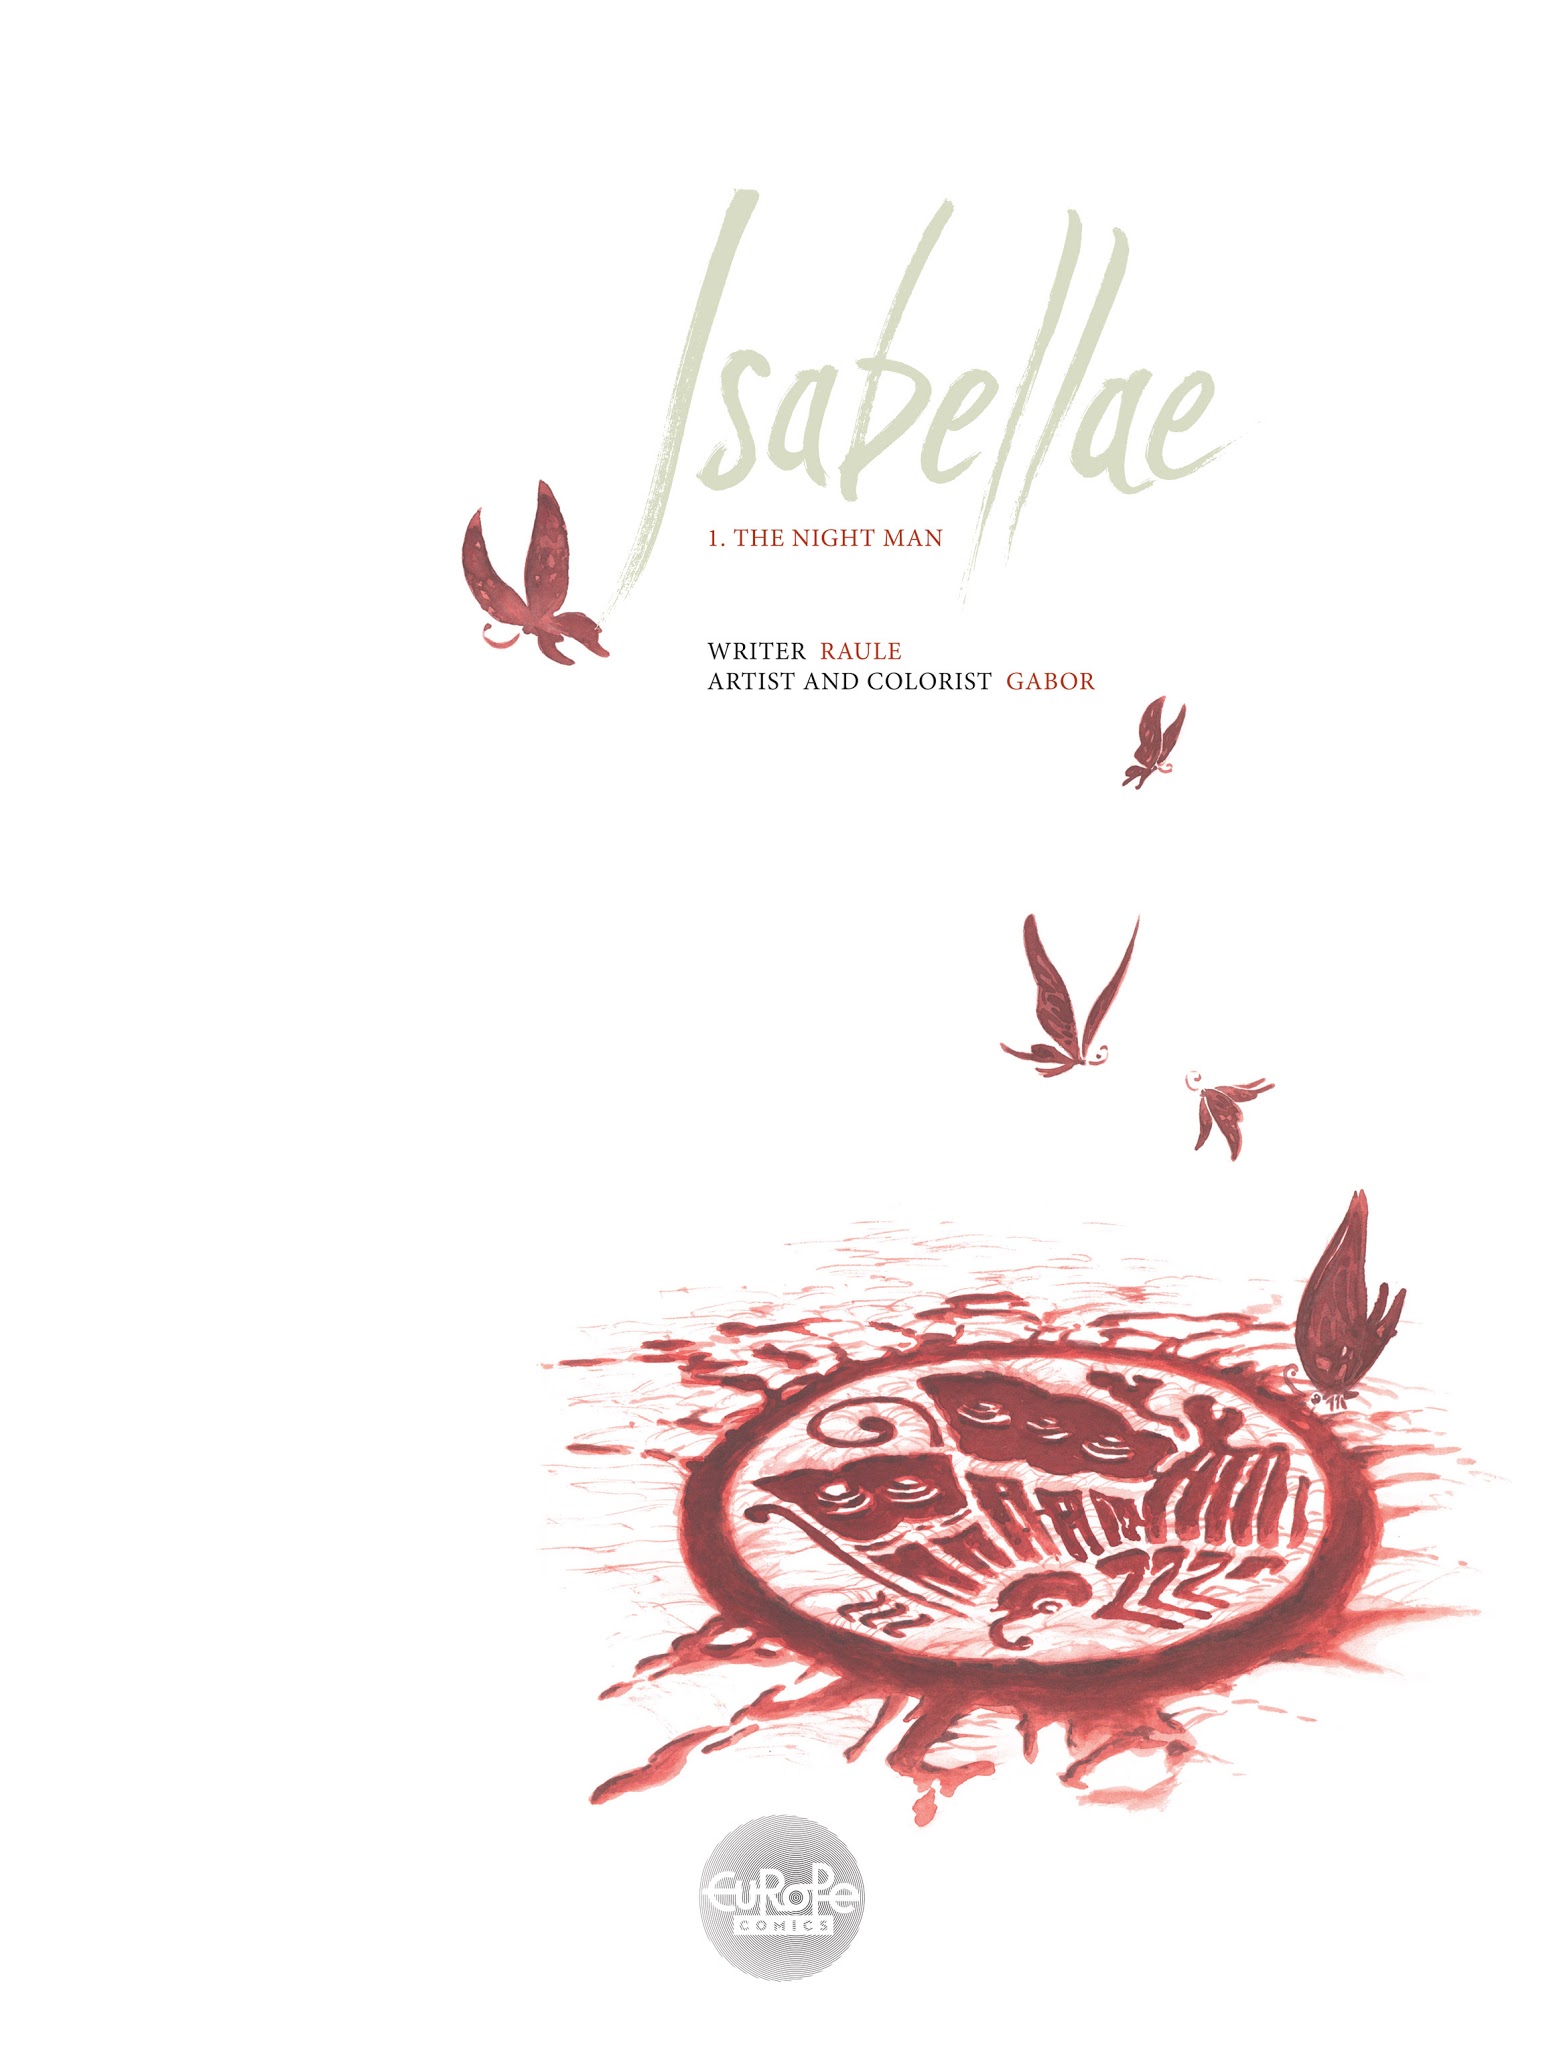 Read online Isabellae comic -  Issue #1 - 3